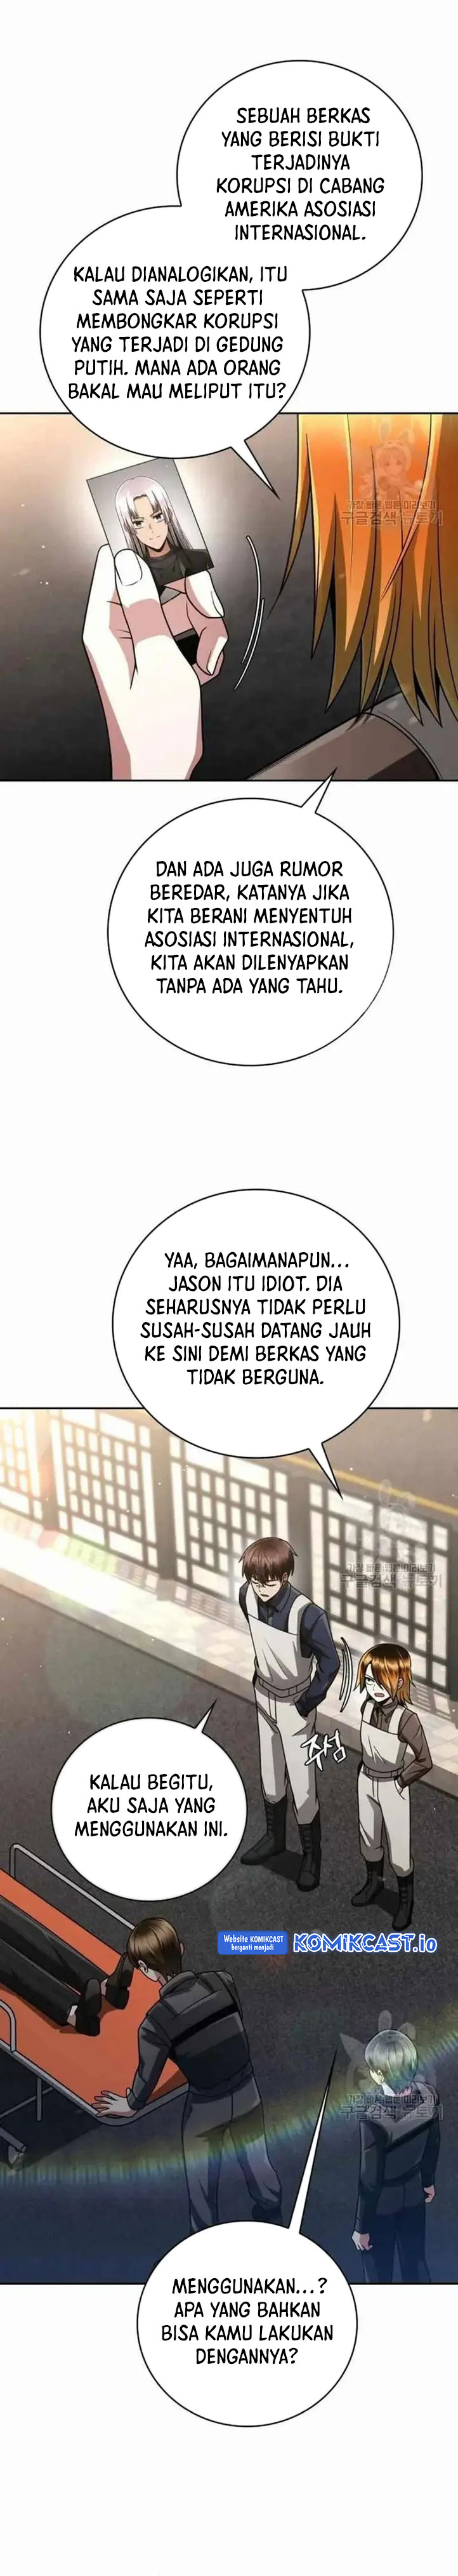 Dilarang COPAS - situs resmi www.mangacanblog.com - Komik clever cleaning life of the returned genius hunter 037 - chapter 37 38 Indonesia clever cleaning life of the returned genius hunter 037 - chapter 37 Terbaru 29|Baca Manga Komik Indonesia|Mangacan